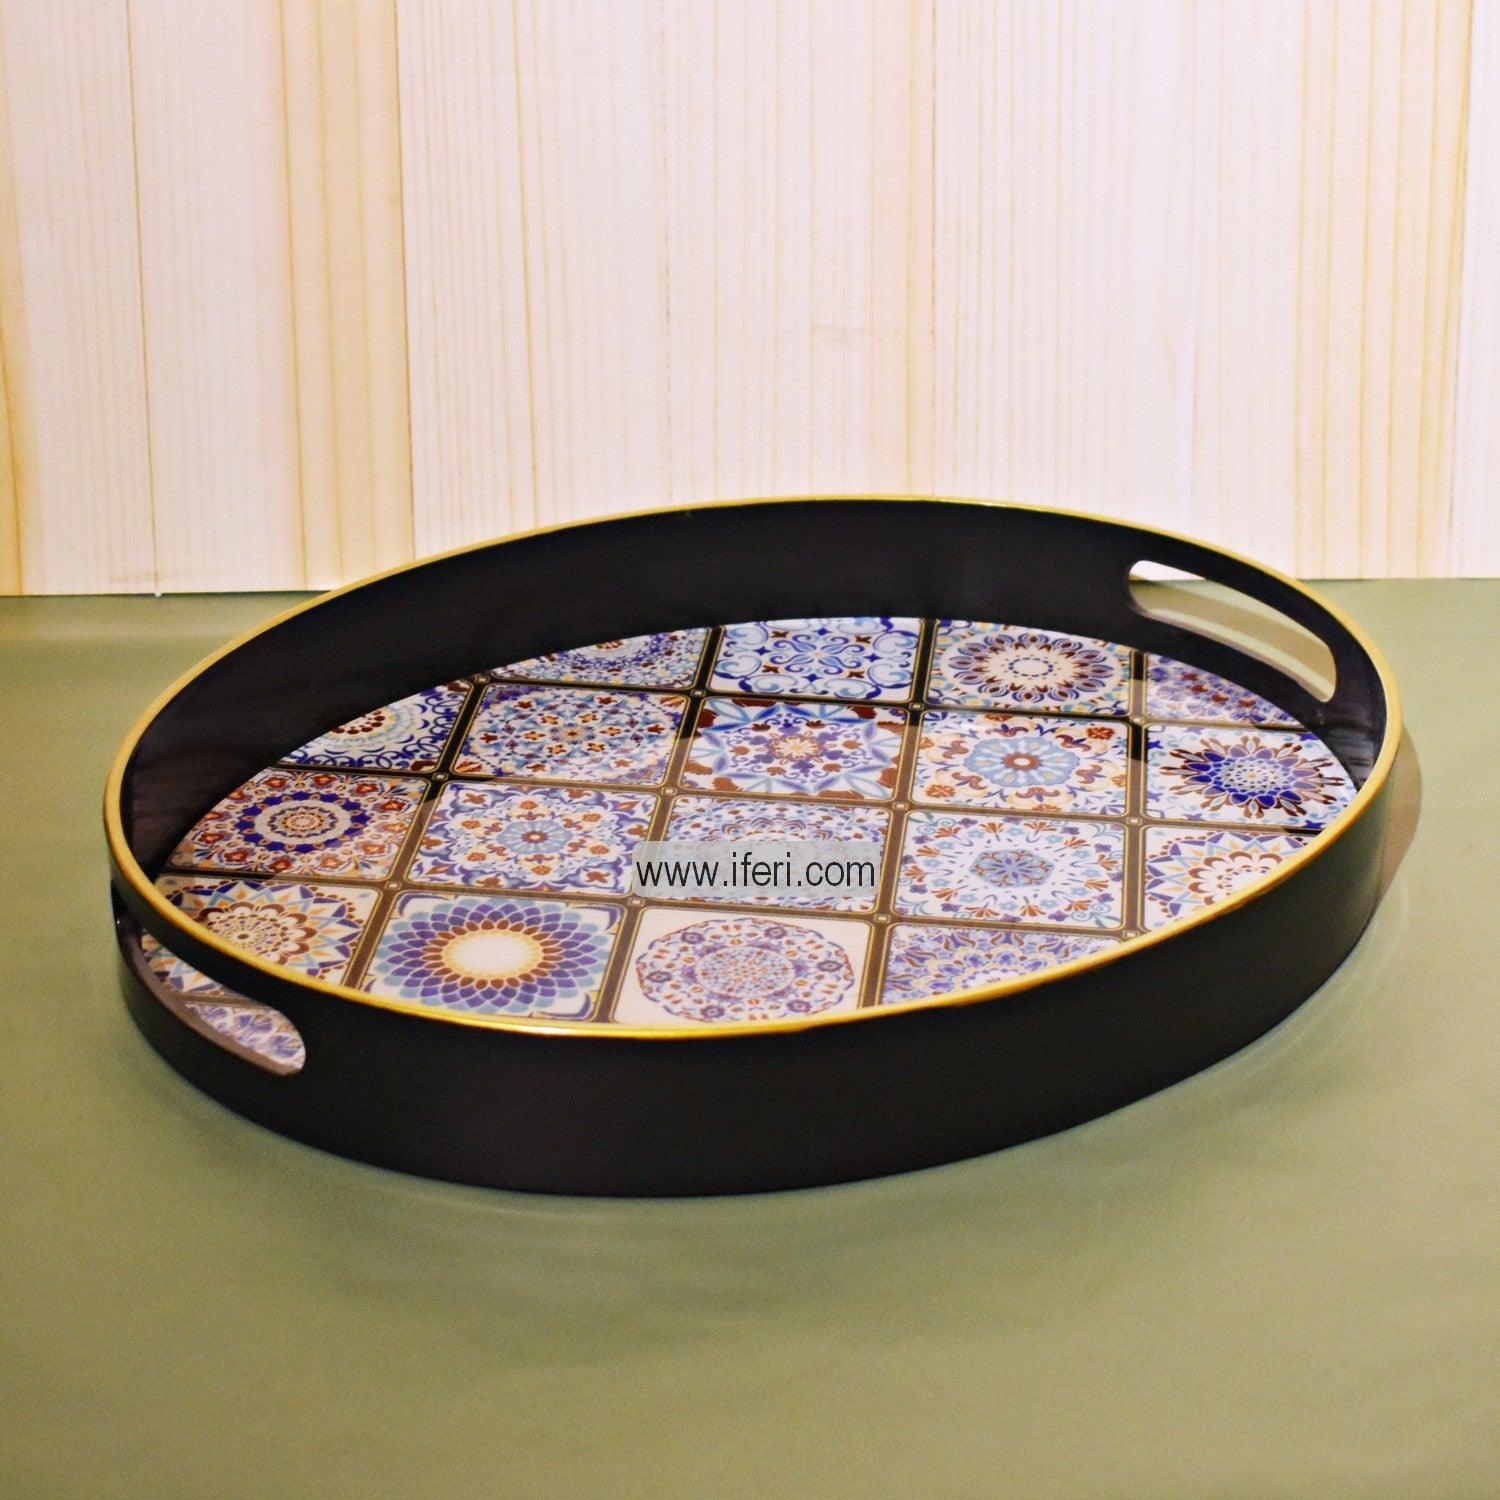 16 Inch ABS Oval Shaped Serving Tray GAIH6-6 Price in Bangladesh - iferi.com